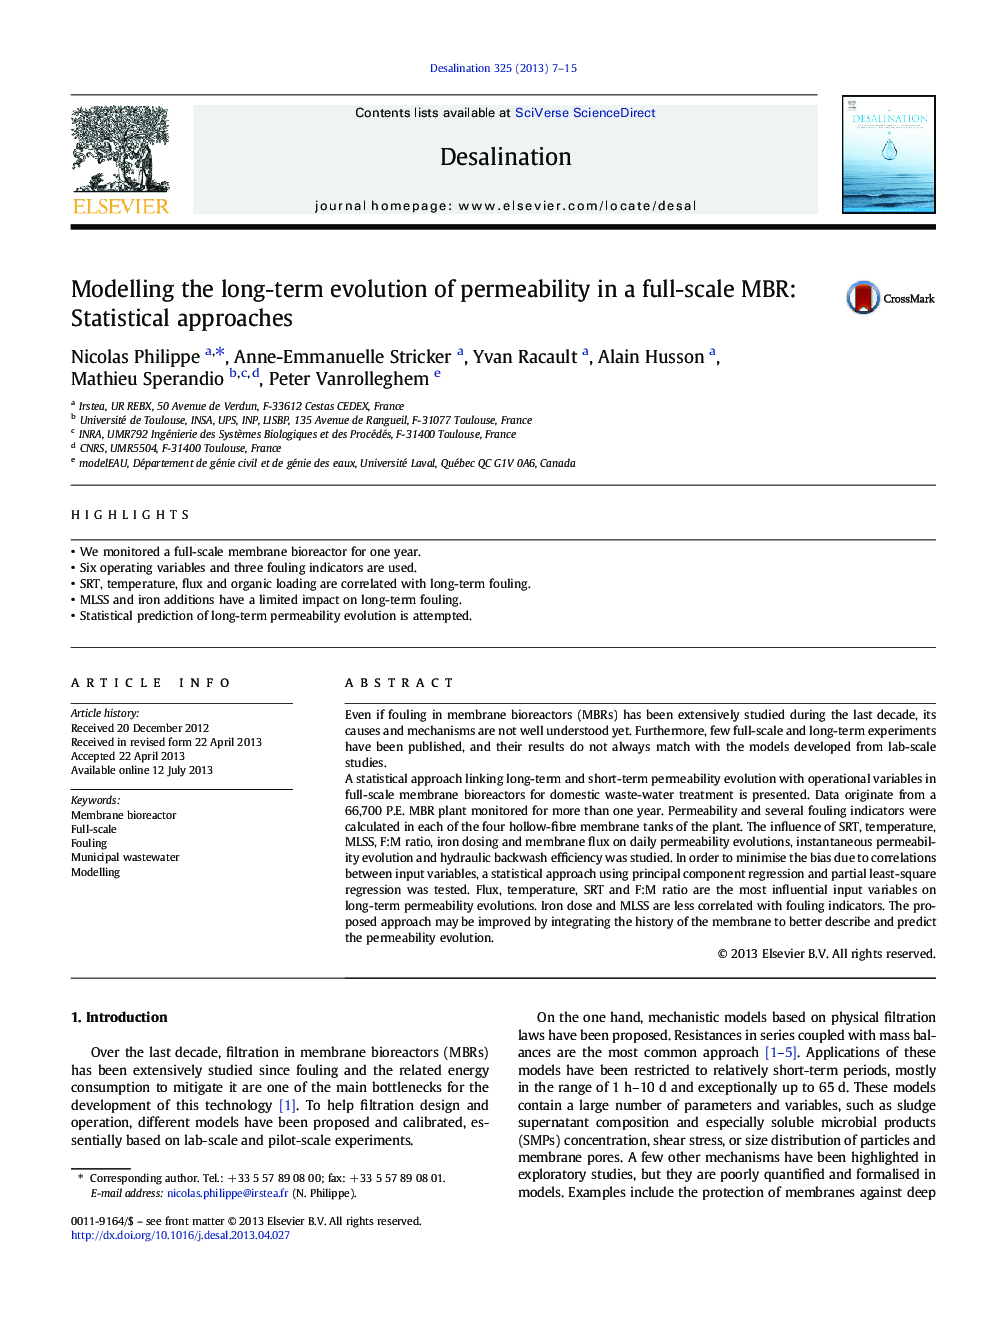 Modelling the long-term evolution of permeability in a full-scale MBR: Statistical approaches